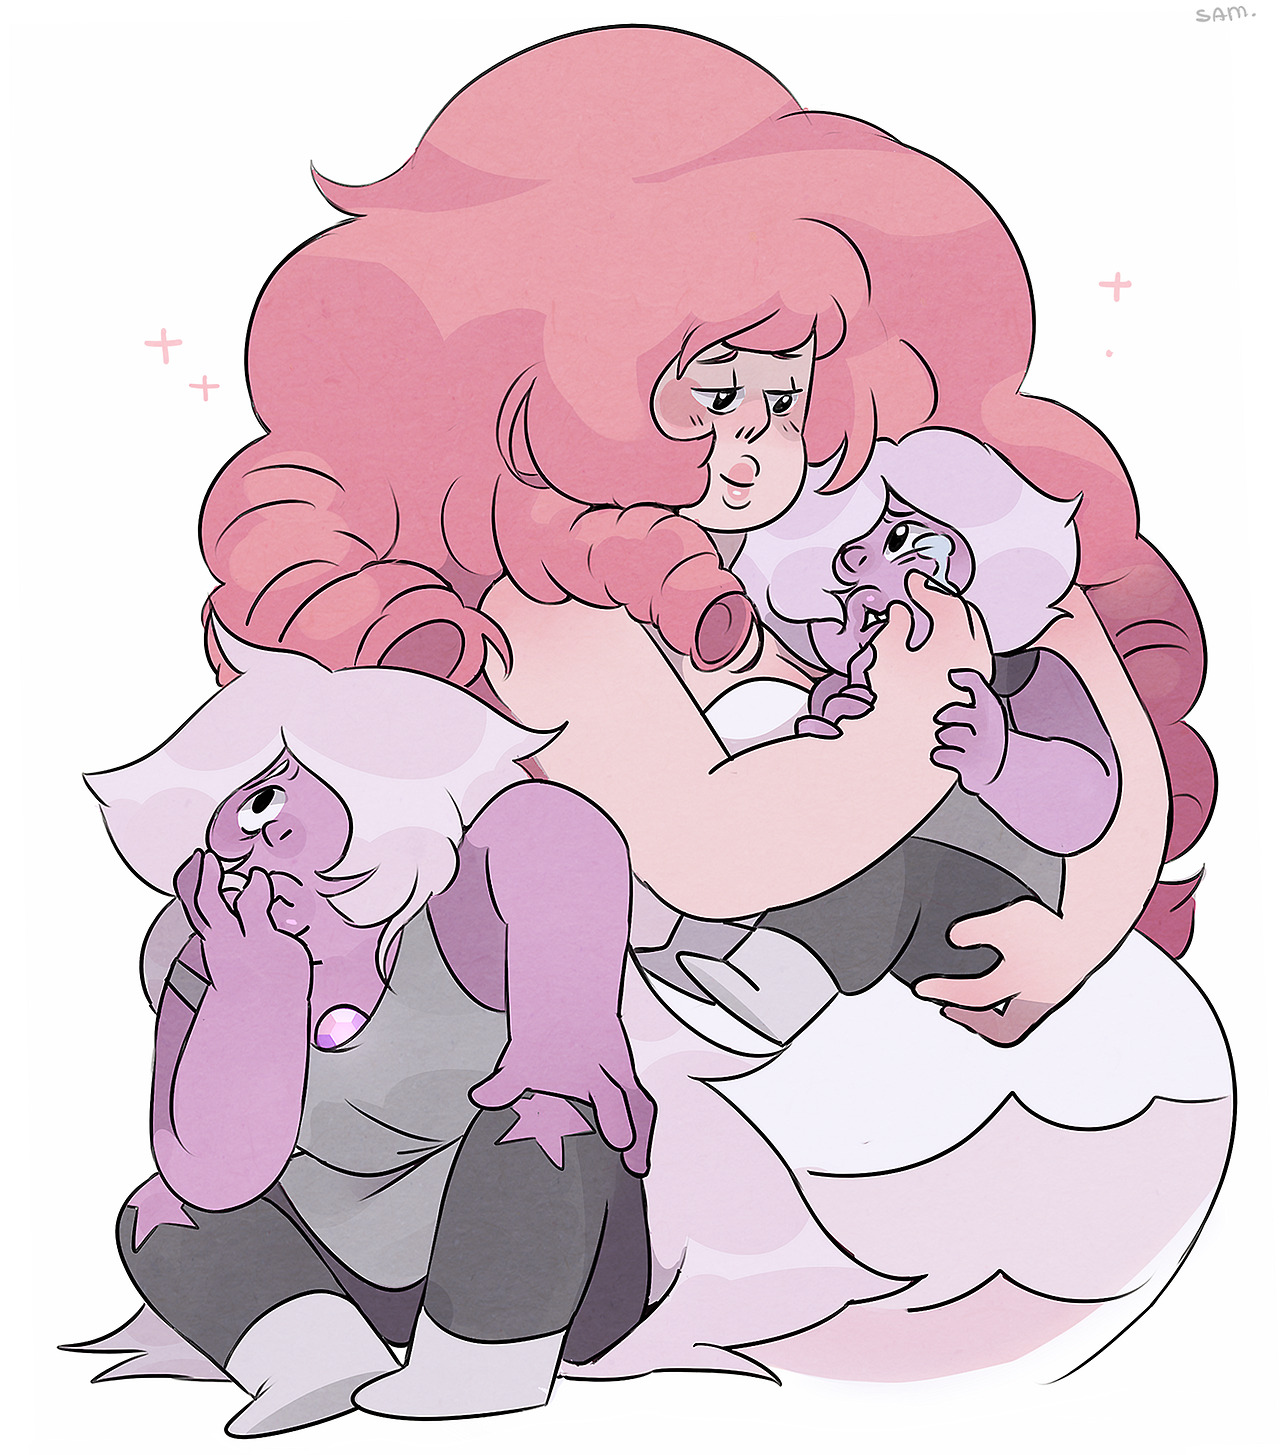 I love the idea that Rose had a strong maternal instinct, especially with Amethyst 💕